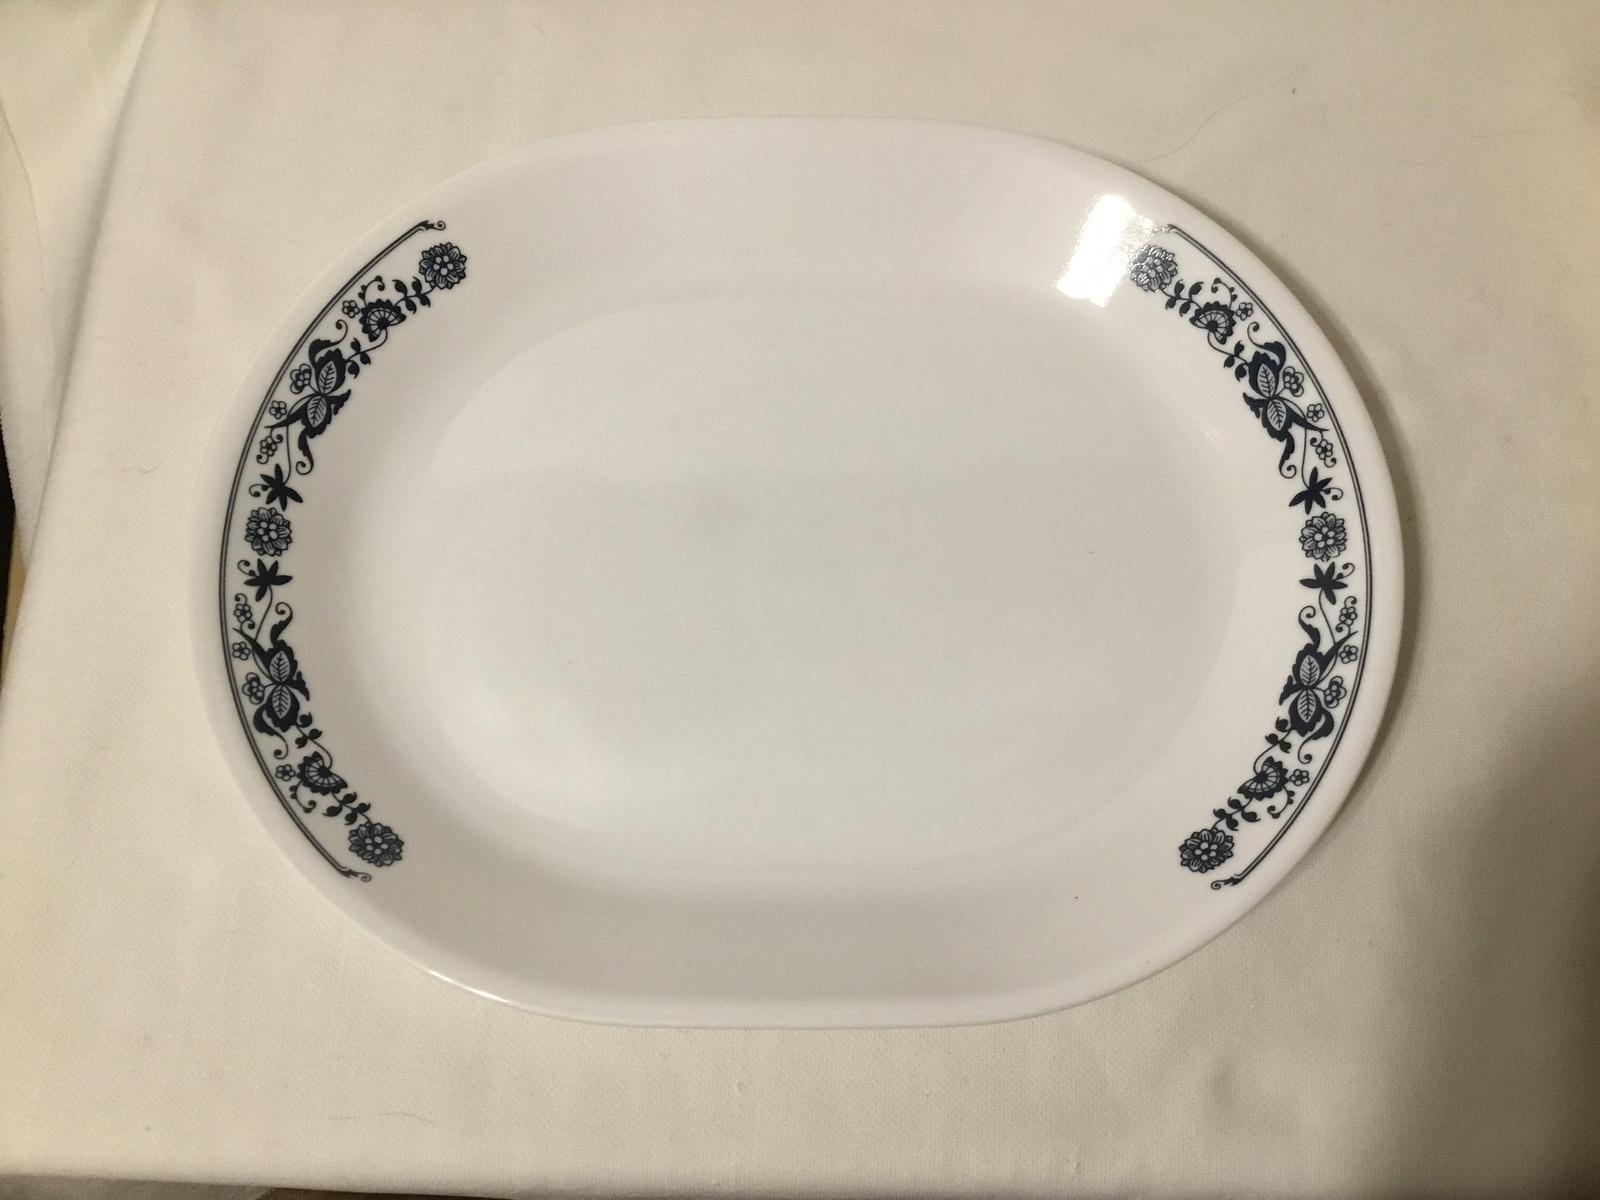 Primary image for Corning Corelle Old Town Blue 12 1/4" Oval Serving Platter